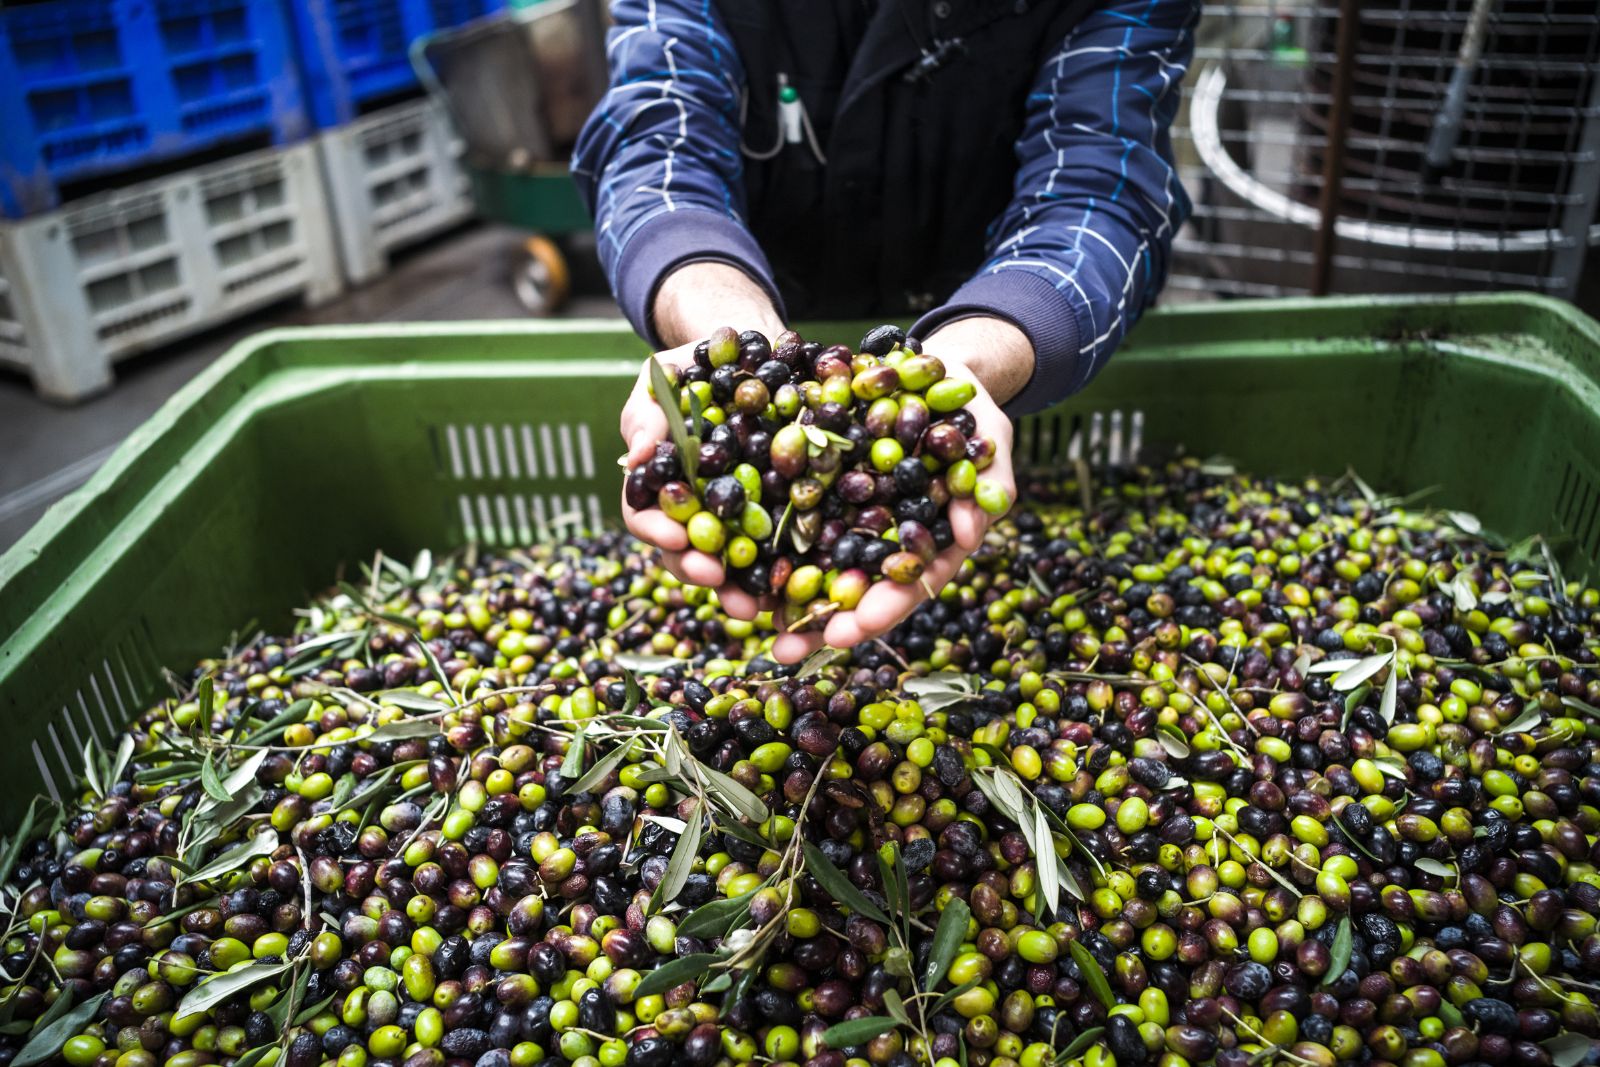 Big batch of green and black olives ready to get processed into olive oil